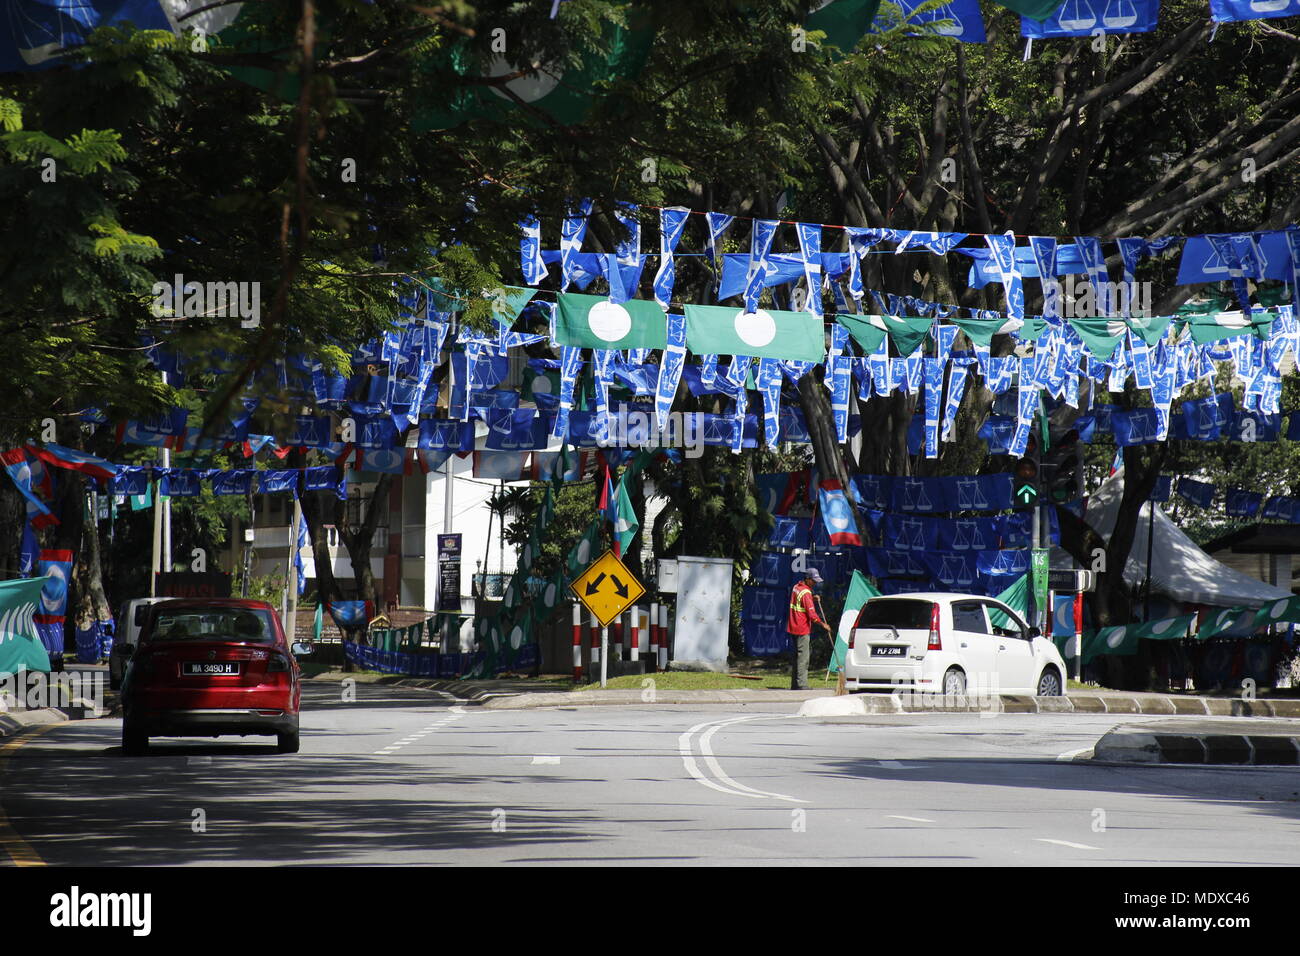 Kuala Lumpur, Malaysia. 21st April, 2018. The upcoming May 2018 general elections is expected to be a keenly contested fight between the ruling coalition party and the opposition alliance. Flags of the political parties can be seen decorating the roads in Kuala Lumpur. Credit: Beaconstox/Alamy Live News. Stock Photo